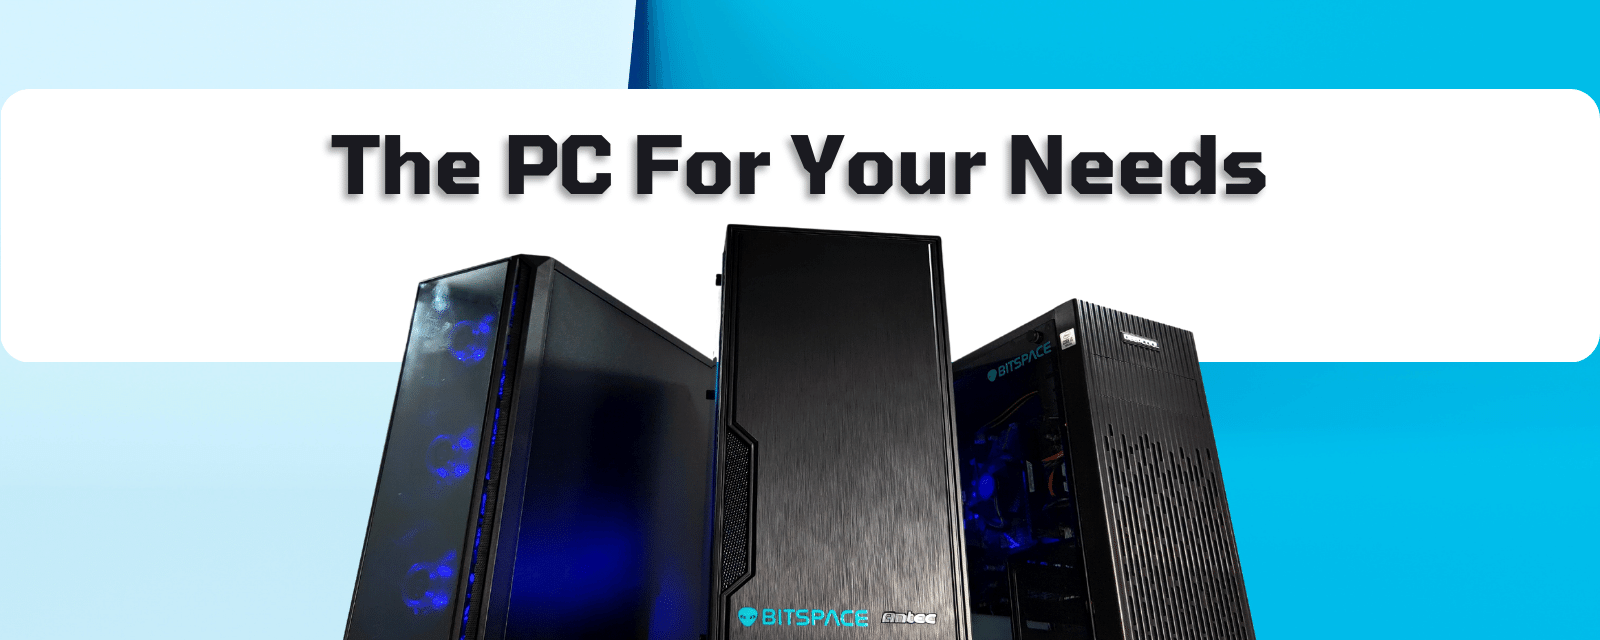 Home & Office PCs The best decision you can make to streamline your experience at home or the office is to have a reliable and robust pc for Internet browsing and applications like Microsoft Office, Trading, Wathcing 4K Movies, Light Gaming & more...